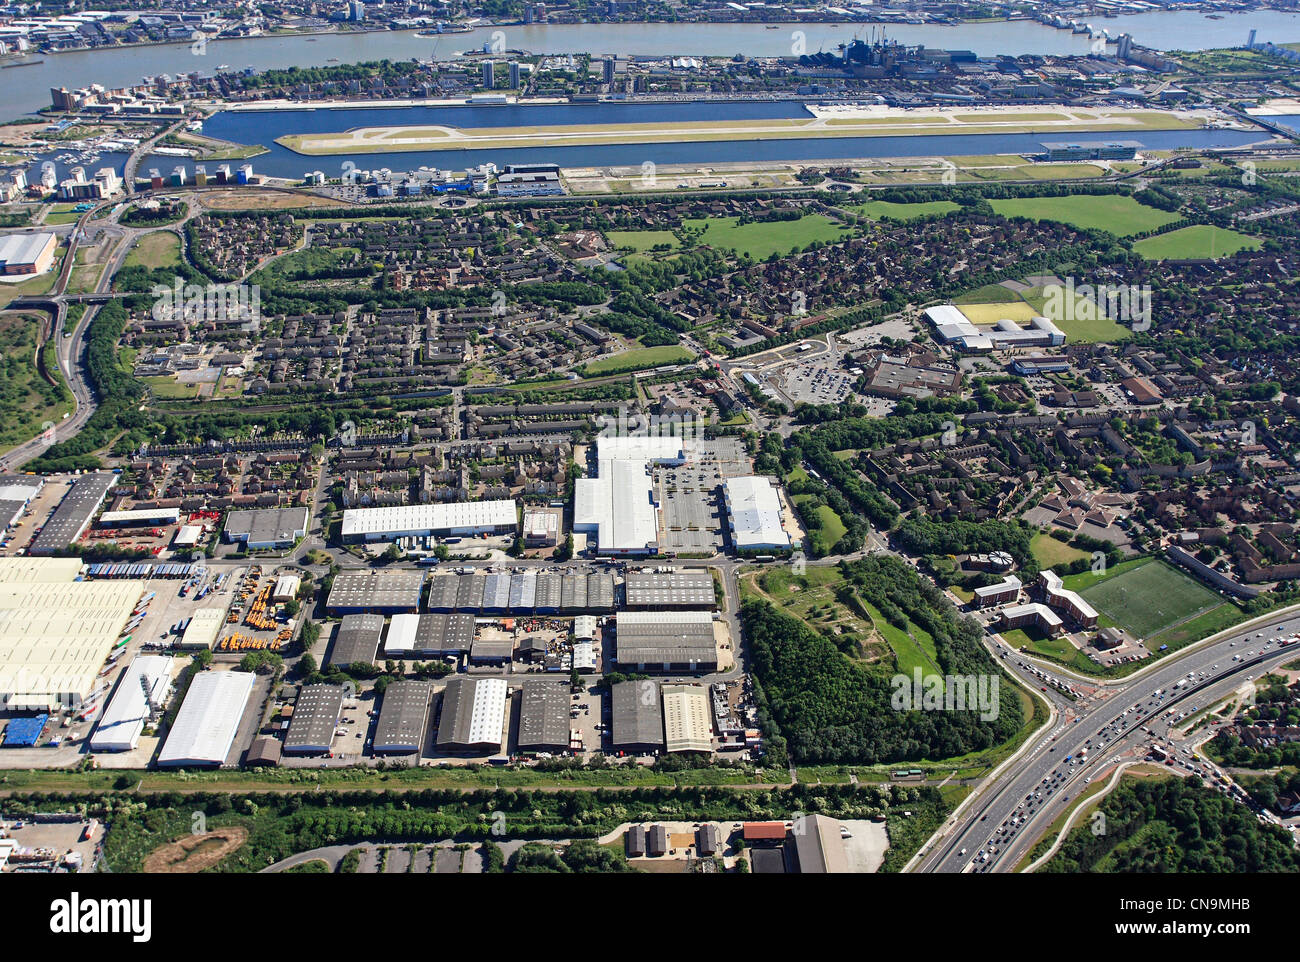 aerial view of Beckton Retail Park & London Industrial Park, Beckton, London E6 looking south towards London City Airport Stock Photo